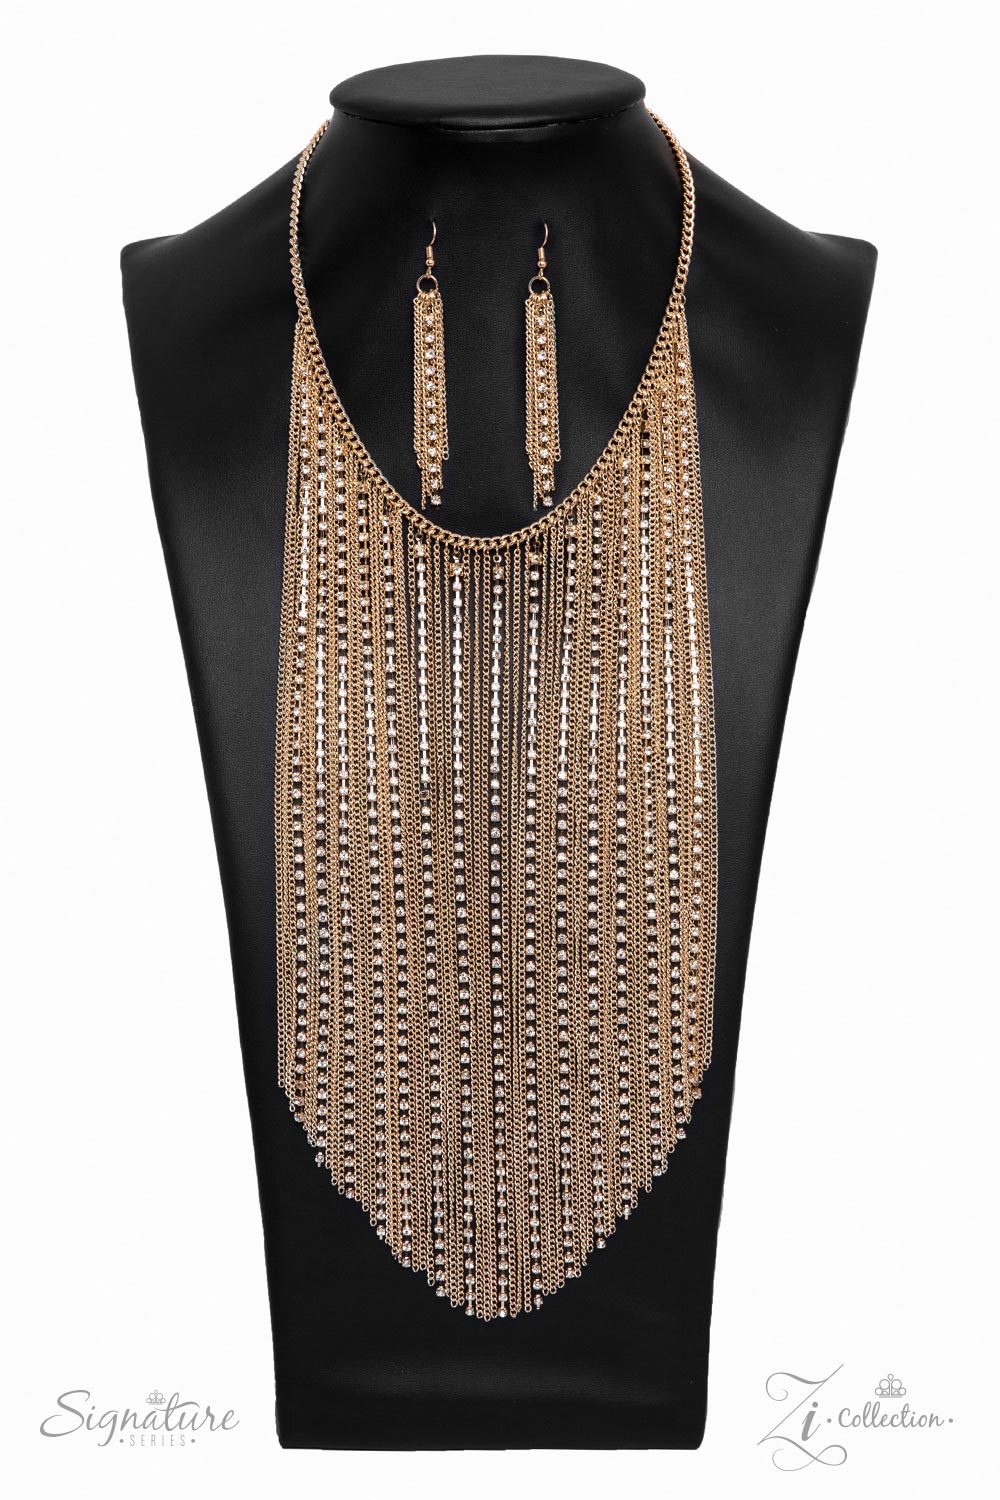 The Ramee Zi Collection Gold Paparazzi Necklace Cashmere Pink Jewels - Cashmere Pink Jewels & Accessories, Cashmere Pink Jewels & Accessories - Paparazzi